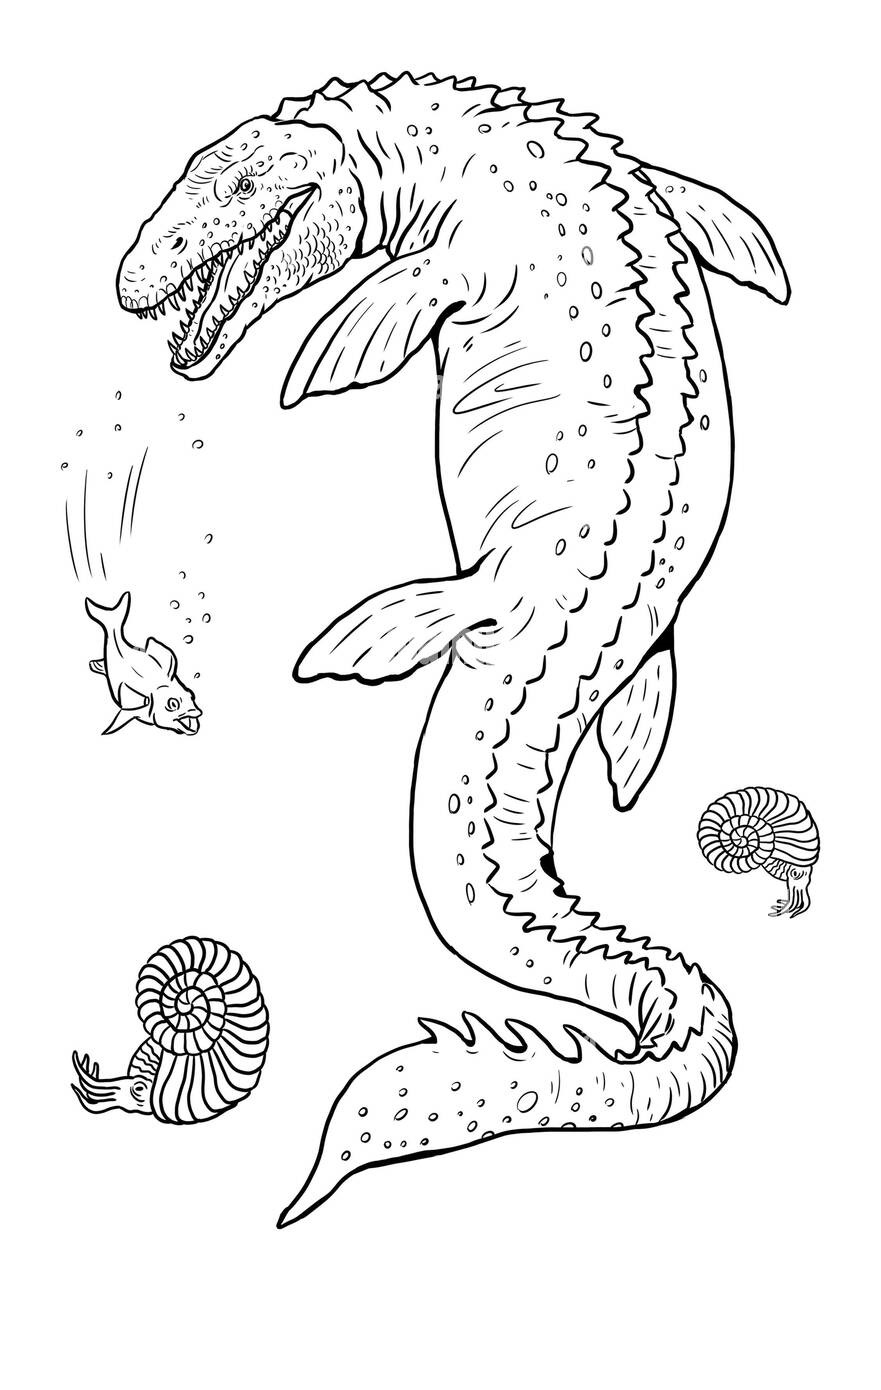 Realistic Dinosaur Coloring Pages - Printable and Easy for Kids